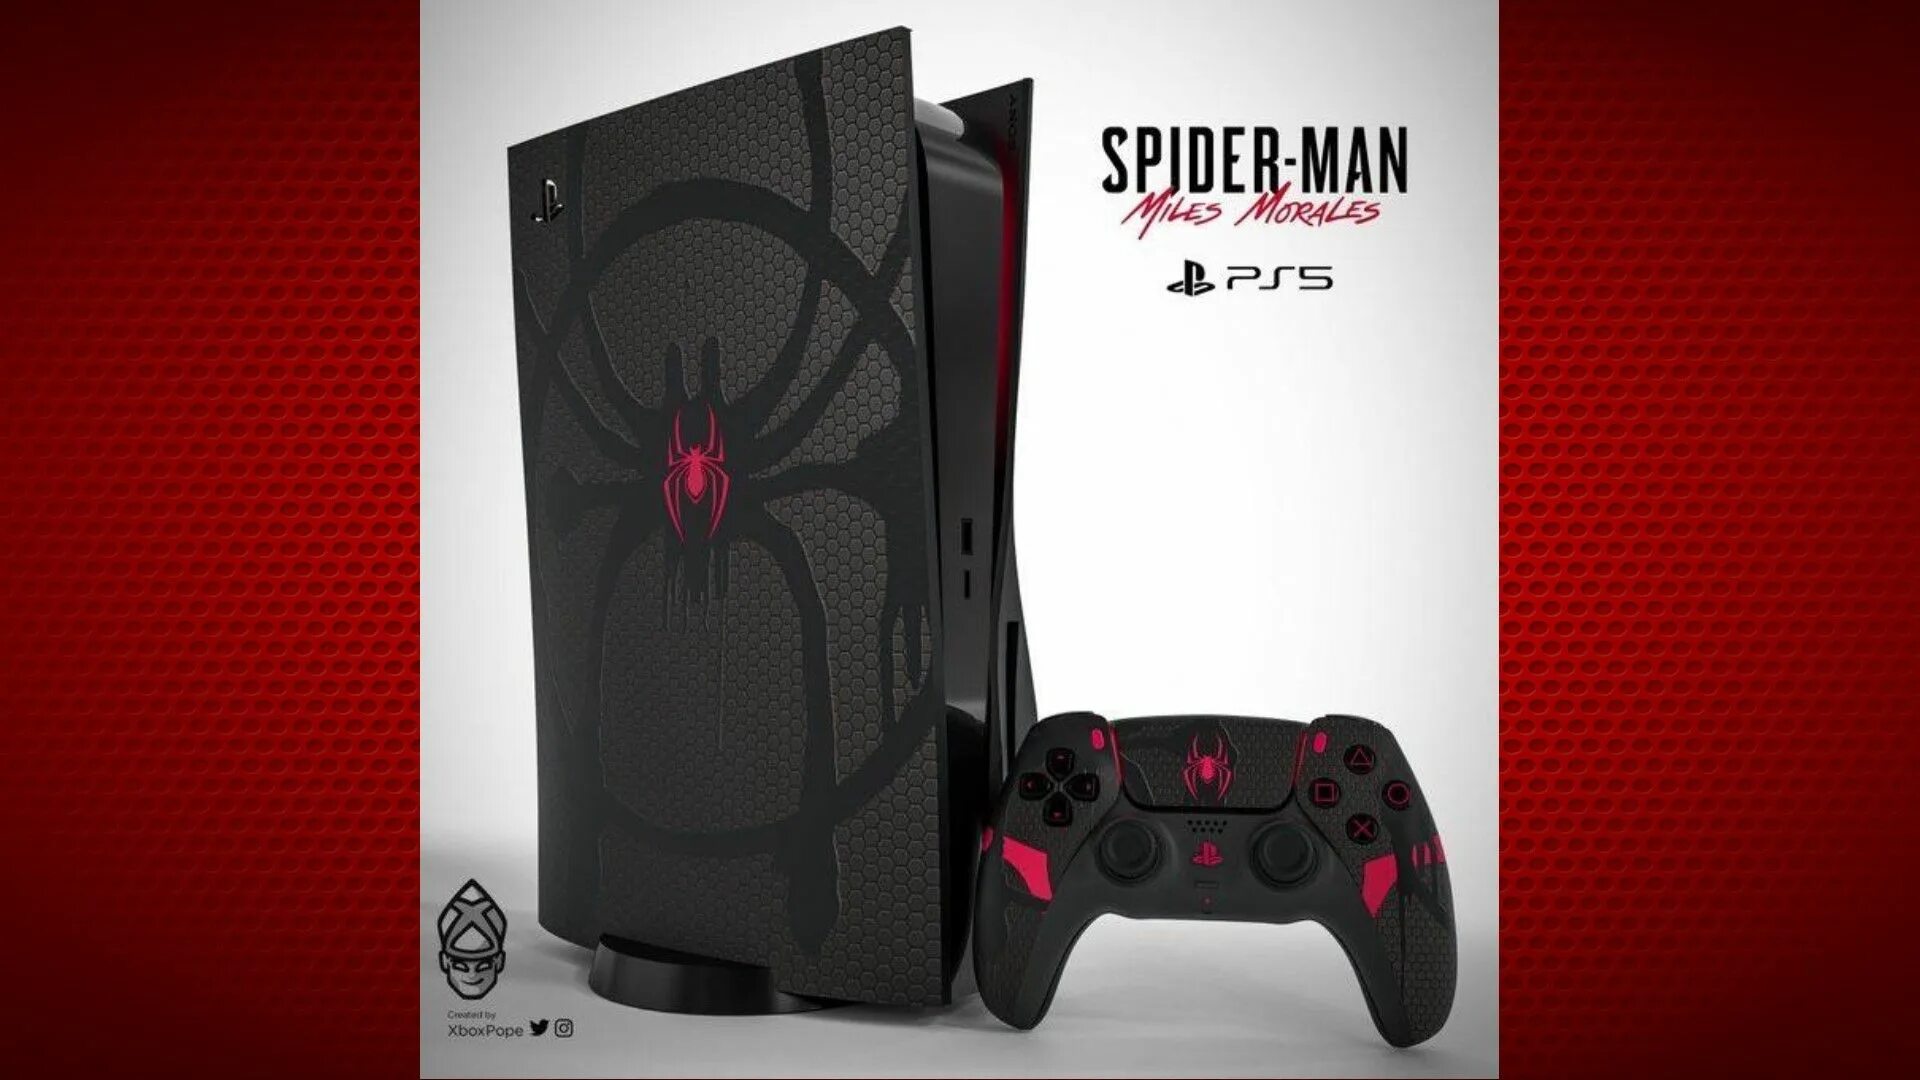 Кастомная ps5. Ps5 Spider man Edition. Ps5, Spider man PLAYSTATION. Ps5 Custom. Spider man ps5 диск.